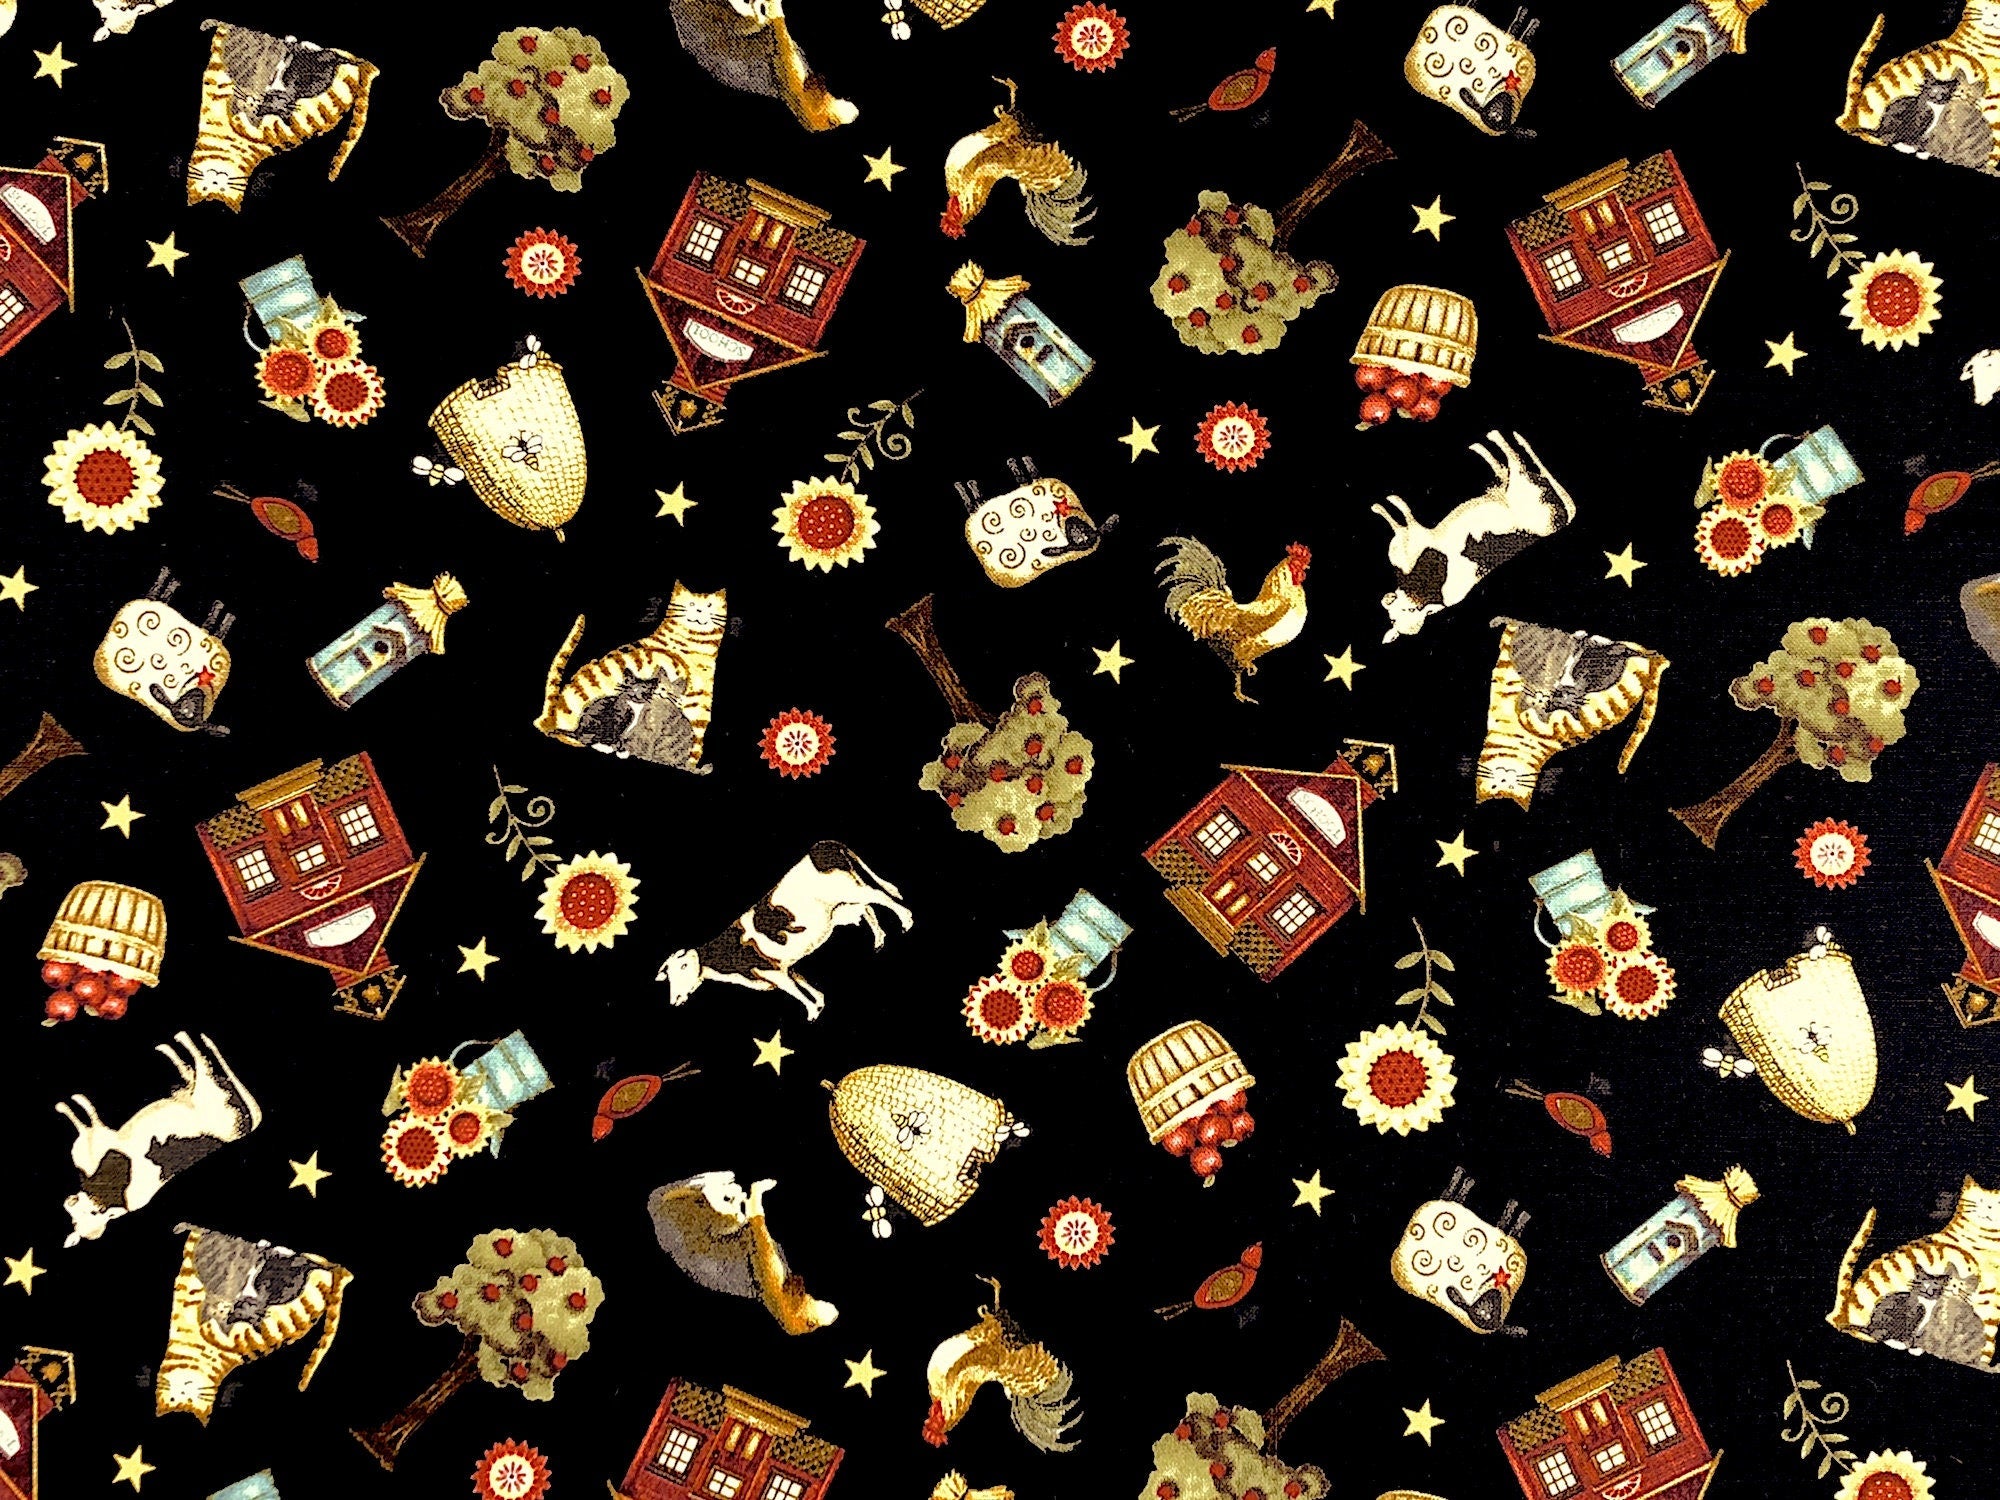 This fabric is called Count Your Blessings and is covered with cows, sheep, flowers, birds apples, bees dogs trees and more. The background is black.